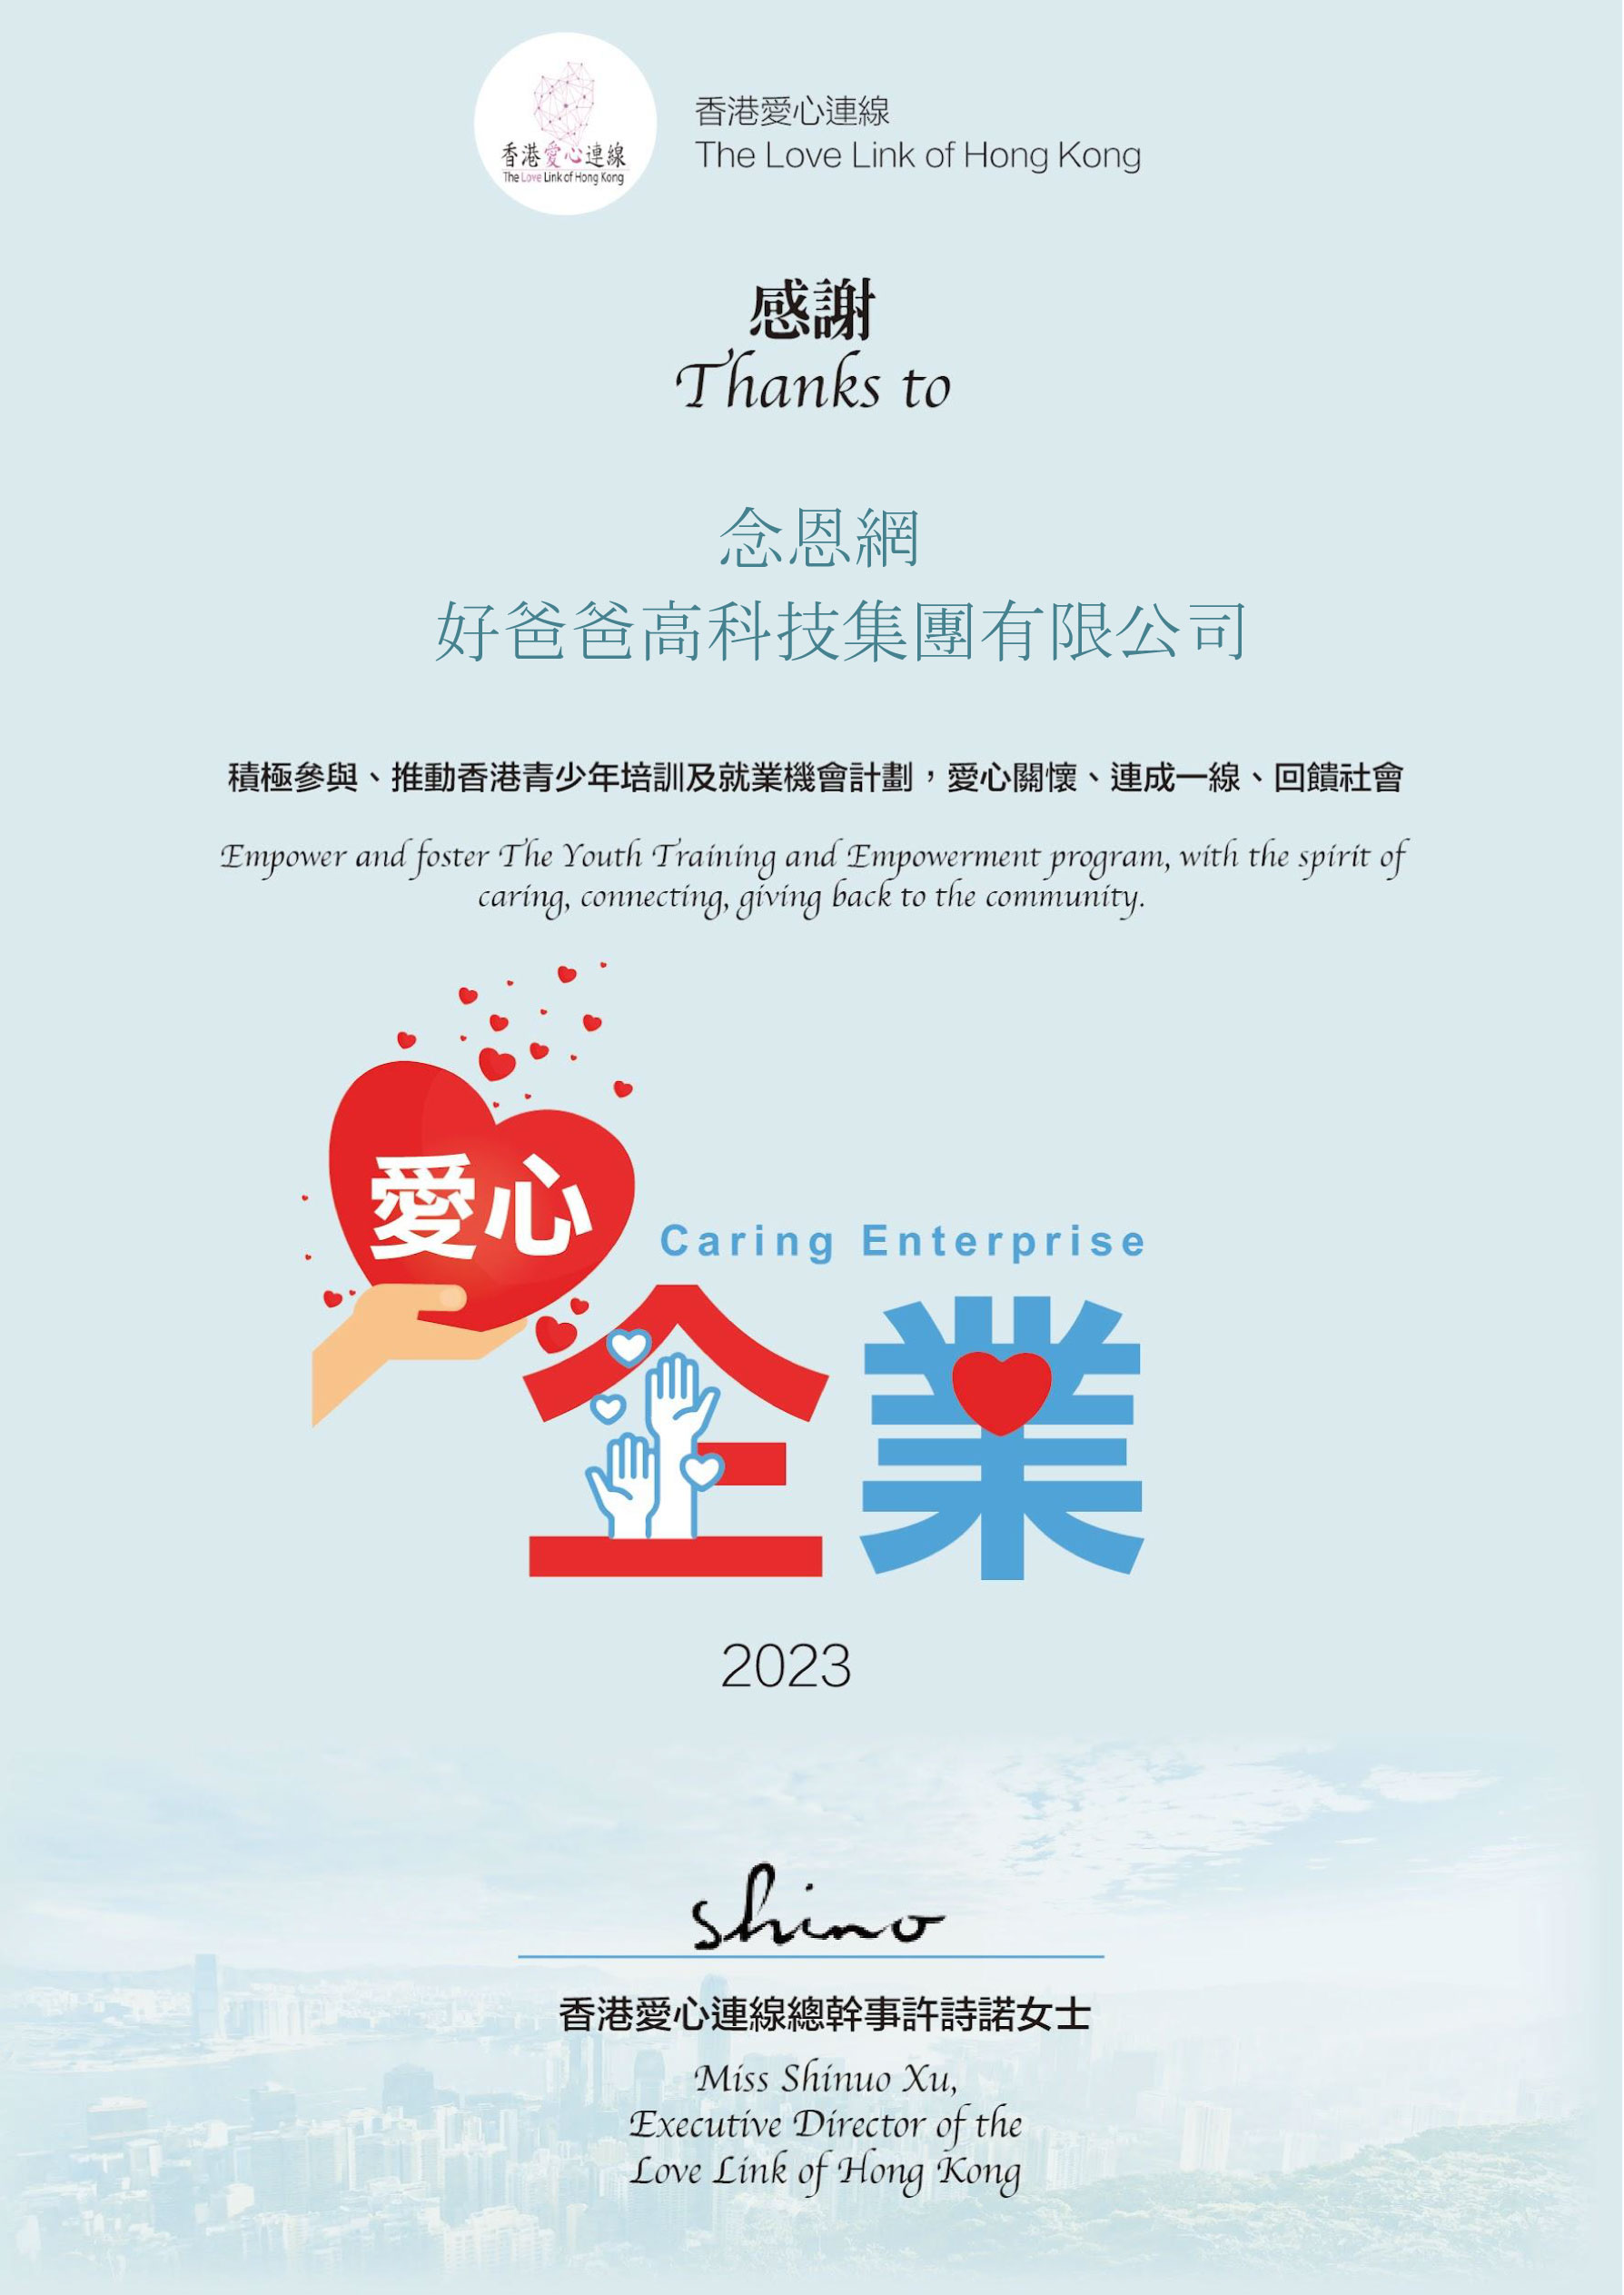 As a free online memorial platform, Iveneration aims to convey filial piety. Online memorial ceremonies for Qingming and Chongyang festivals no longer require the hassle of traveling

